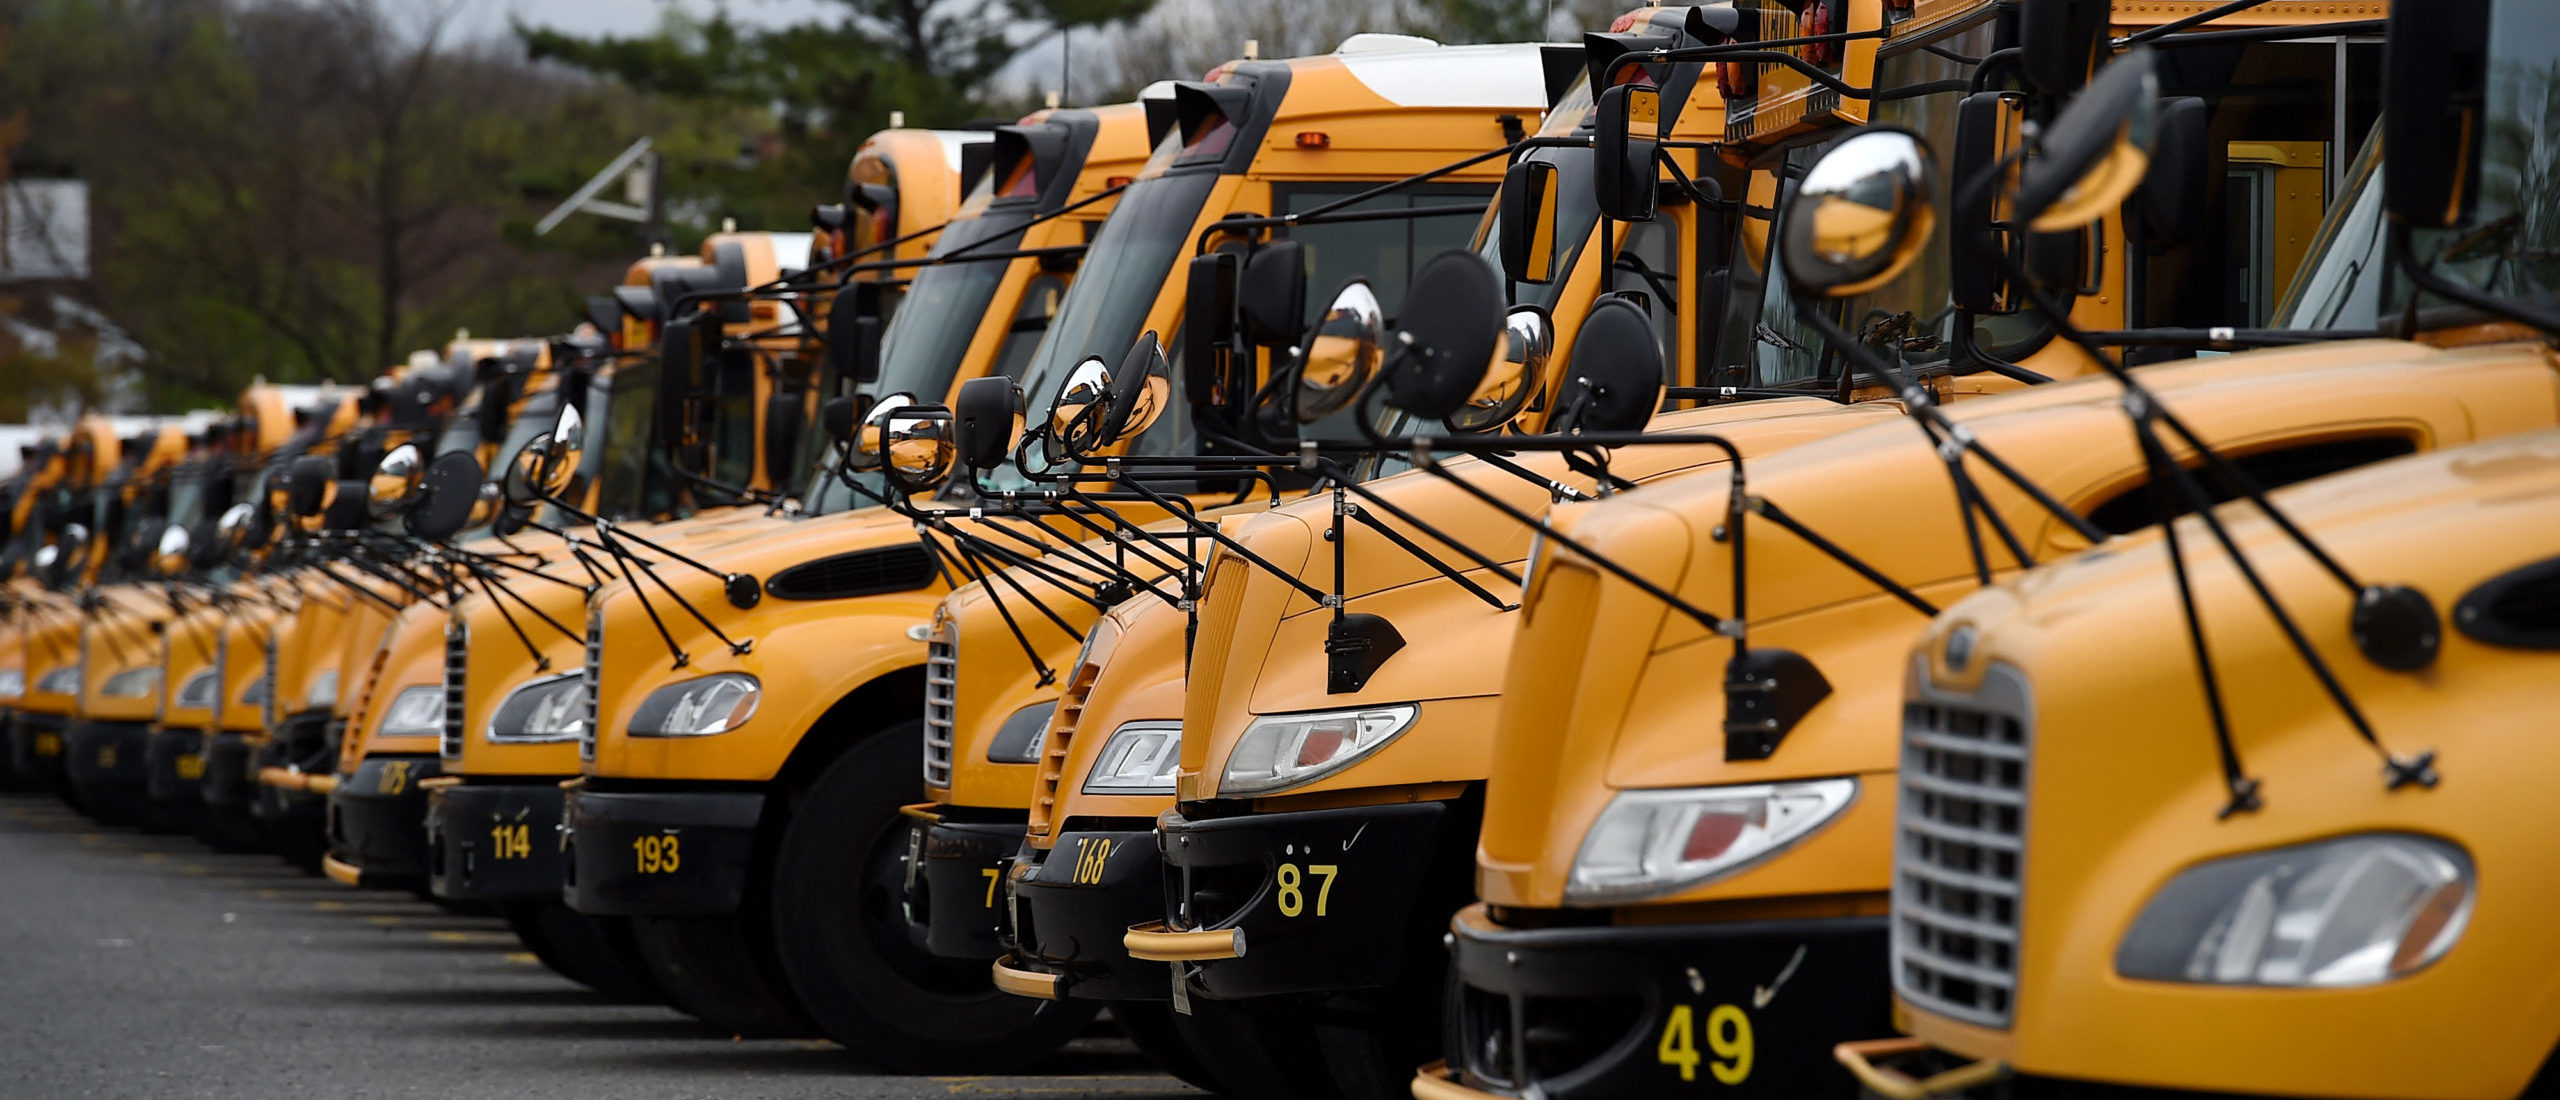 About 100 school buses are parked at the Arlington County Bus Depot, in response to the novel coronavirus, COVID-19 outbreak on March 31, 2020 in Arlington, Virginia. (Photo by Olivier DOULIERY / AFP) (Photo by OLIVIER DOULIERY/AFP via Getty Images)